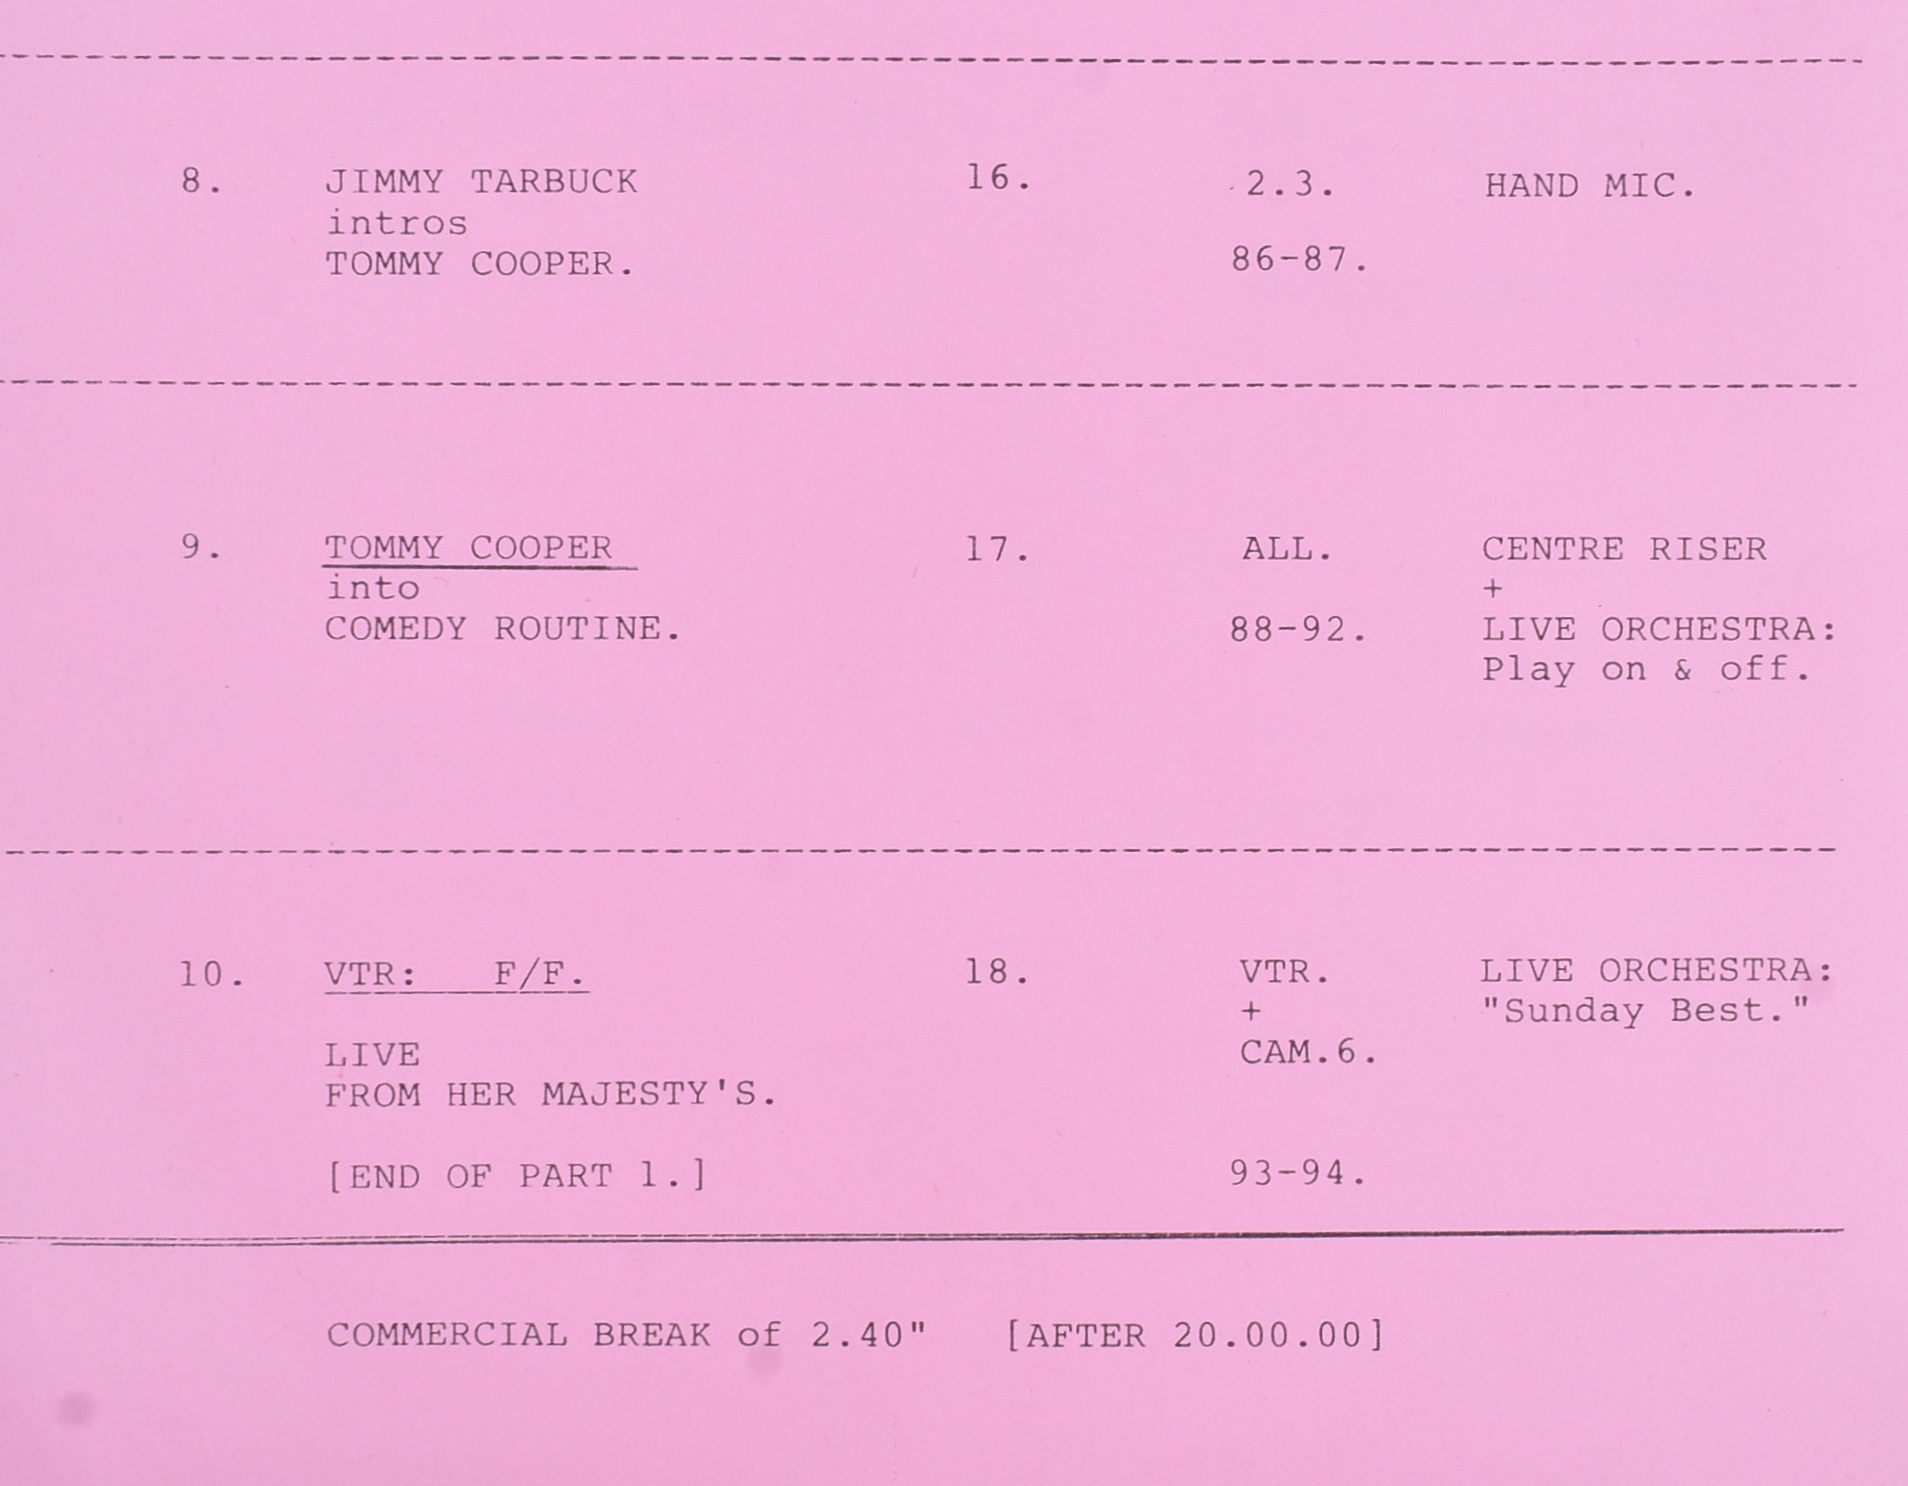 LIVE FROM HER MAJESTY'S - TOMMY COOPER FINAL PERFORMANCE TRANSMISSION ORDER - Image 3 of 4